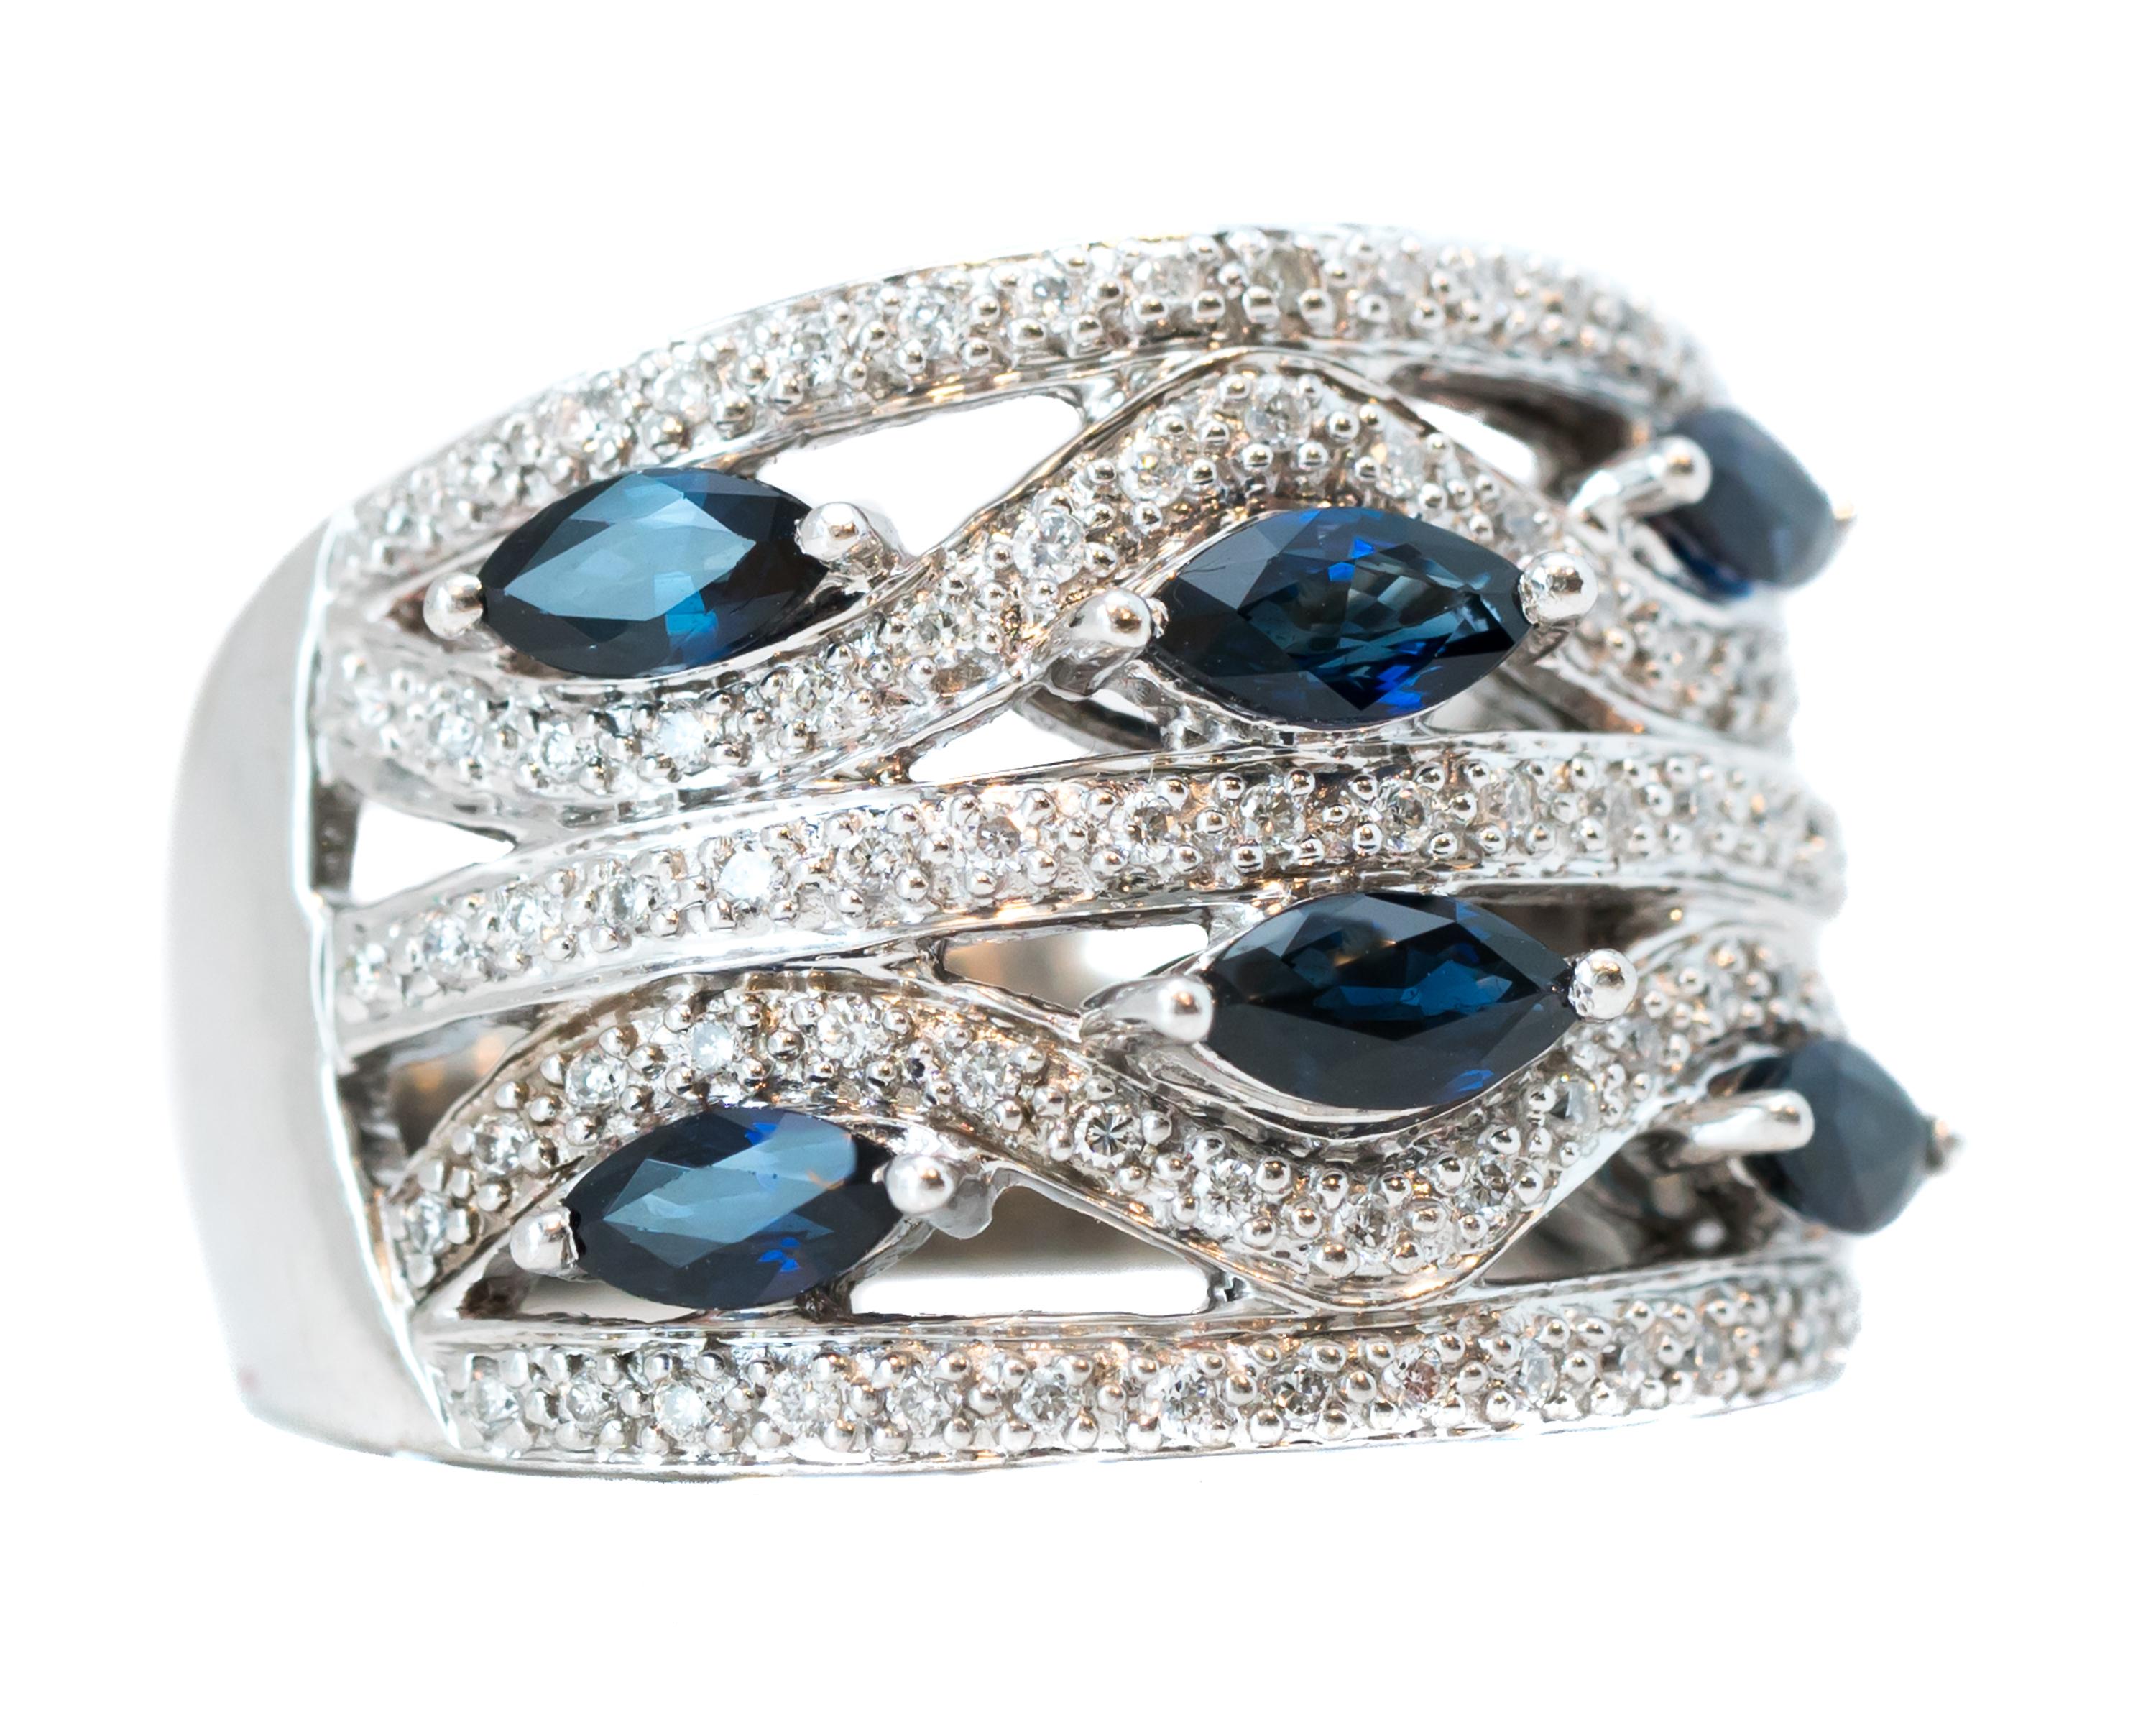 Features:
0.50 carat total Marquise cut Blue Sapphires and 0.50 carat total Round Brilliant Diamonds, all prong set
crafted in 14 karat White Gold setting

Finger to top of stone measures 4.25 millimeters
Width tapers from 16 - 4.5 millimeters
Ring